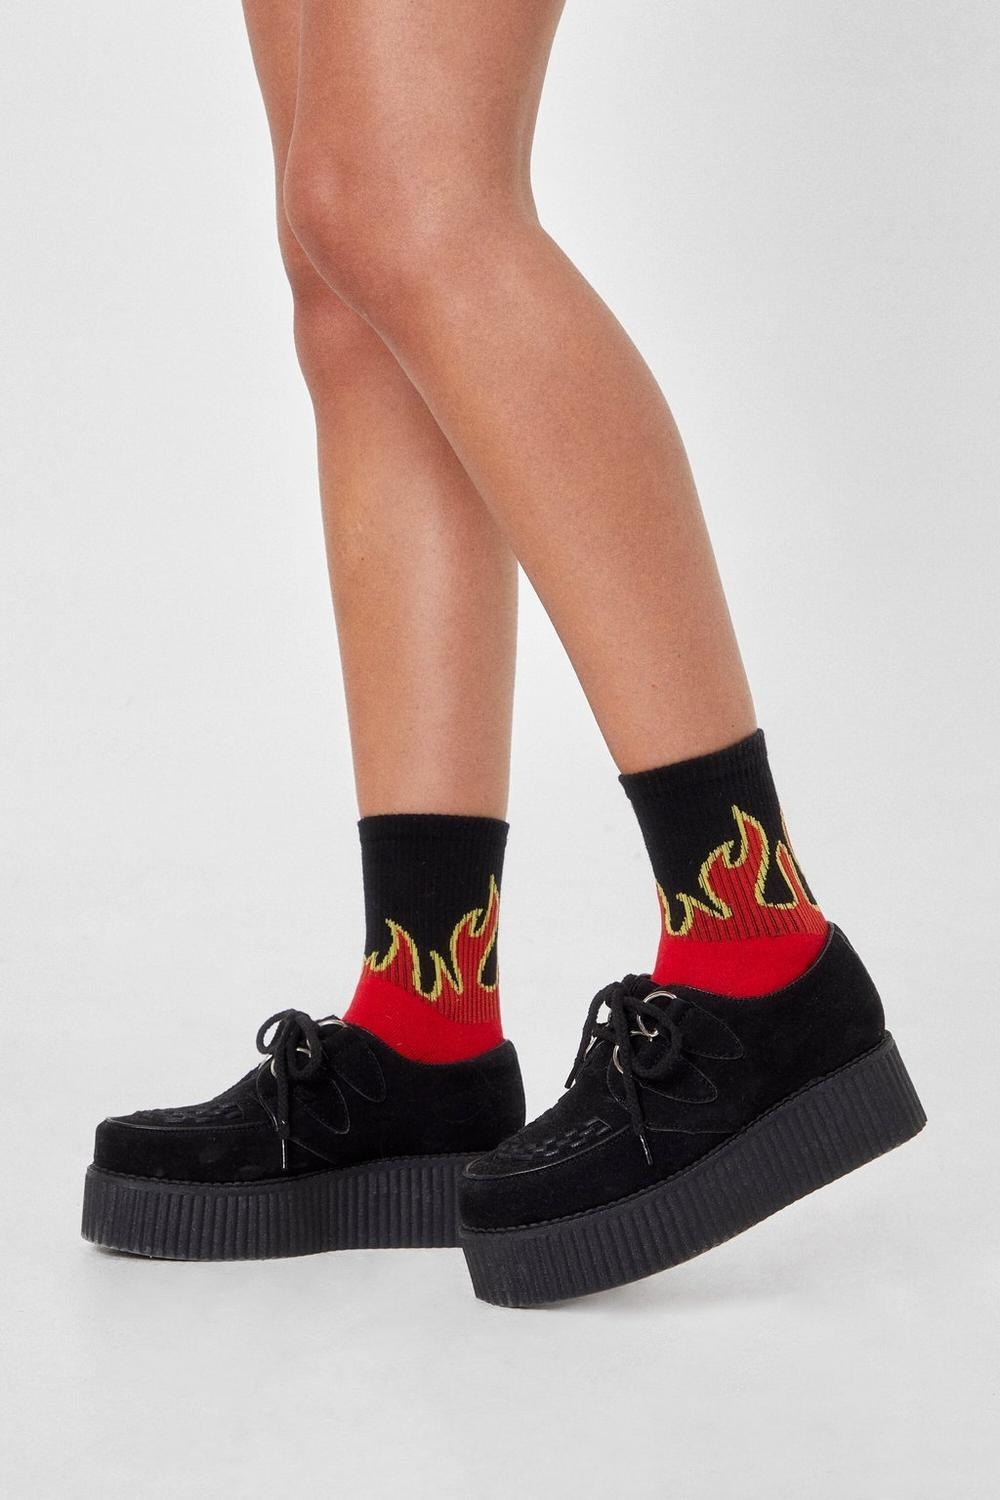 a person wearing socks with flames on them 